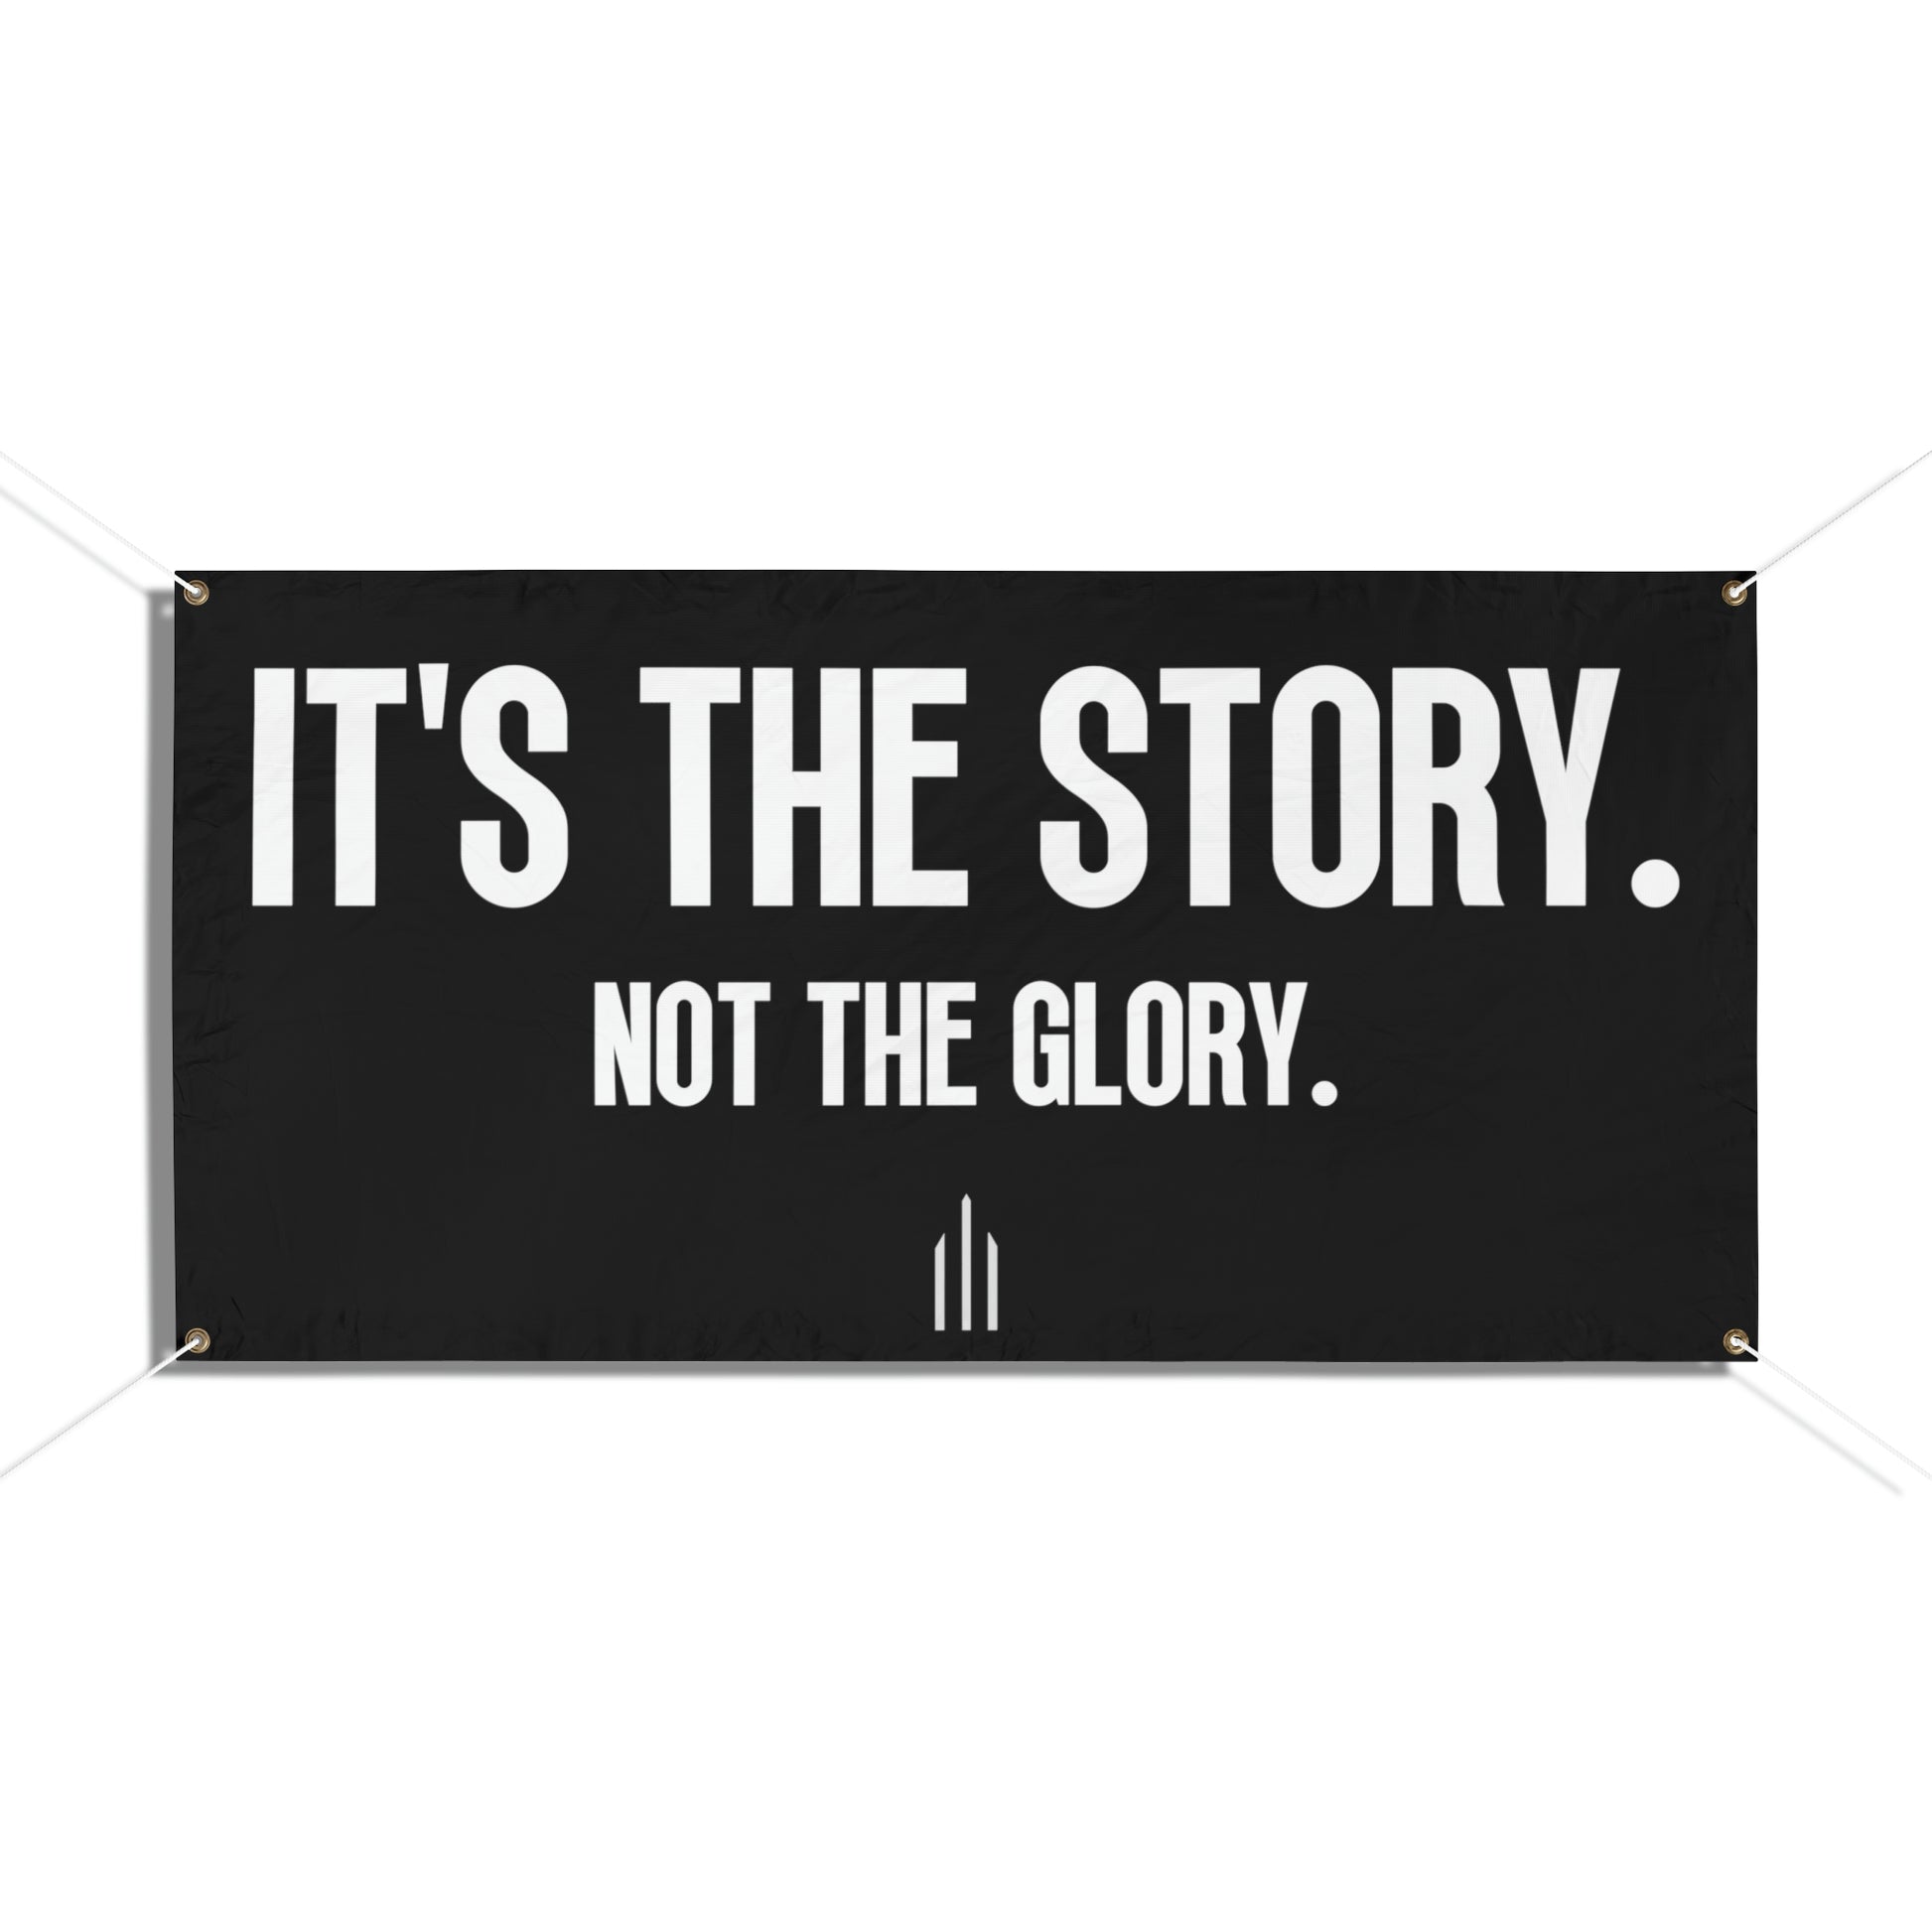 Black Banner w/ Text "It's The Story. Not The Glory."